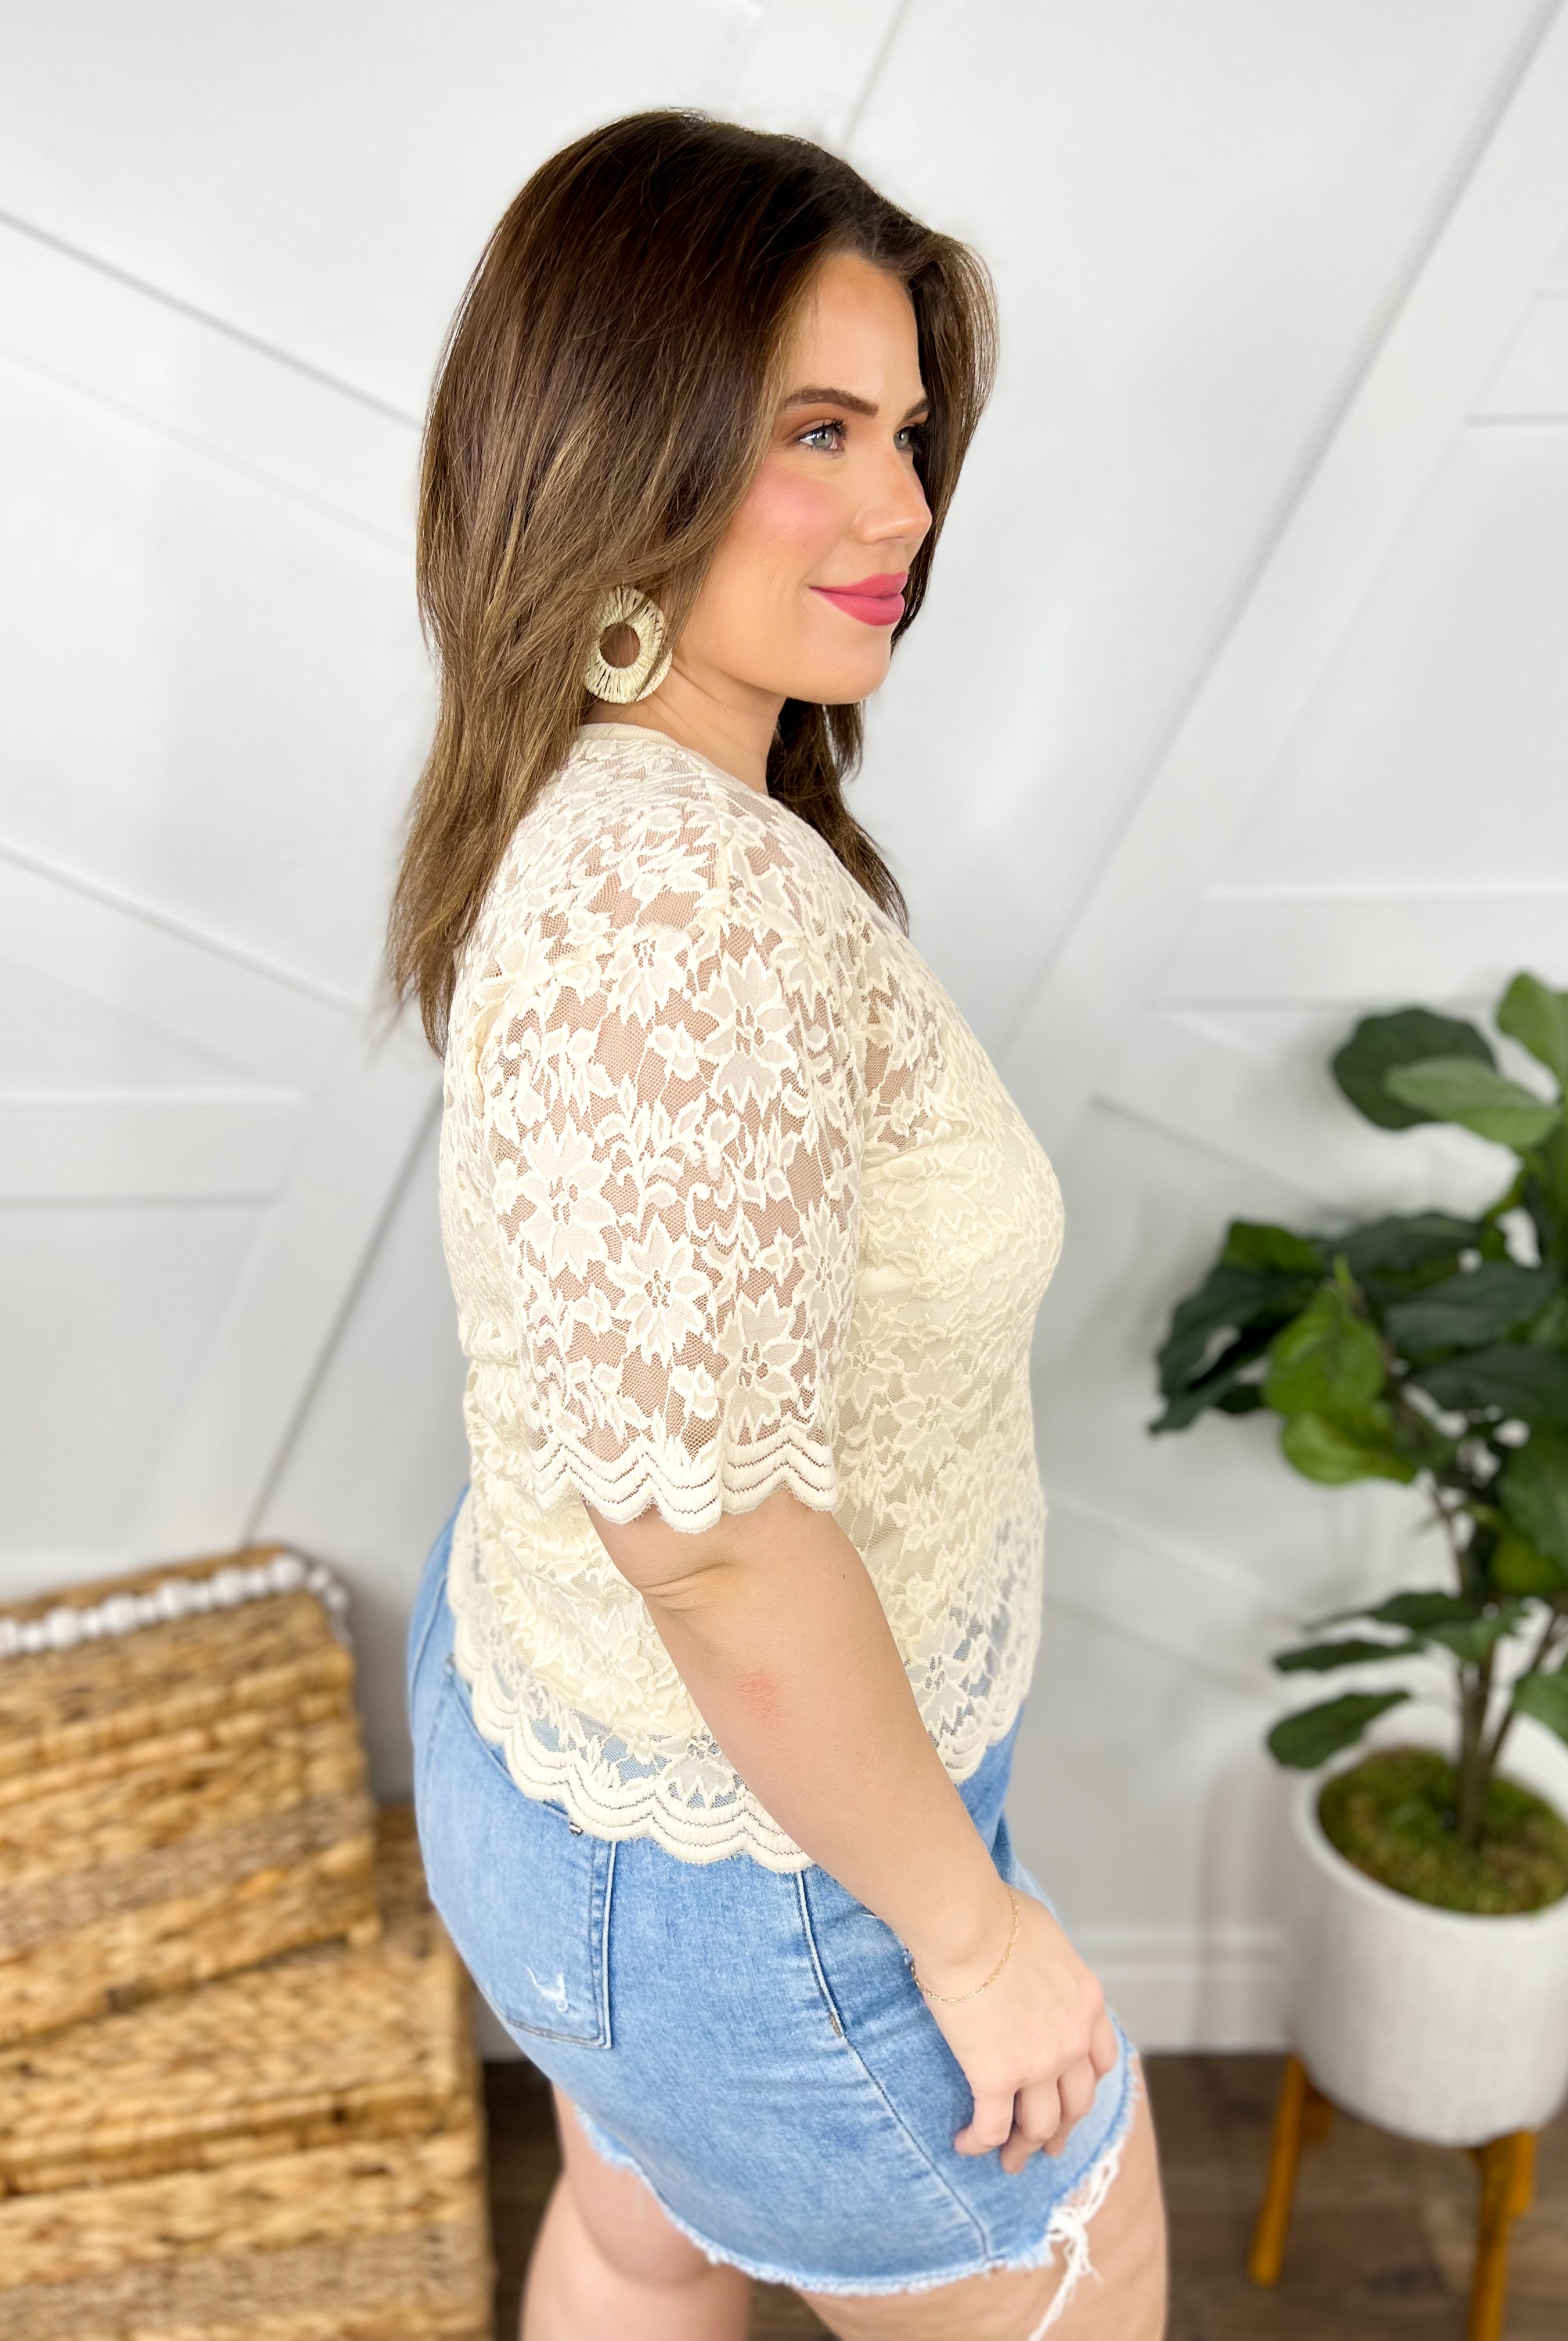 Nothing But Class Top-110 Short Sleeve Top-Easel-Heathered Boho Boutique, Women's Fashion and Accessories in Palmetto, FL